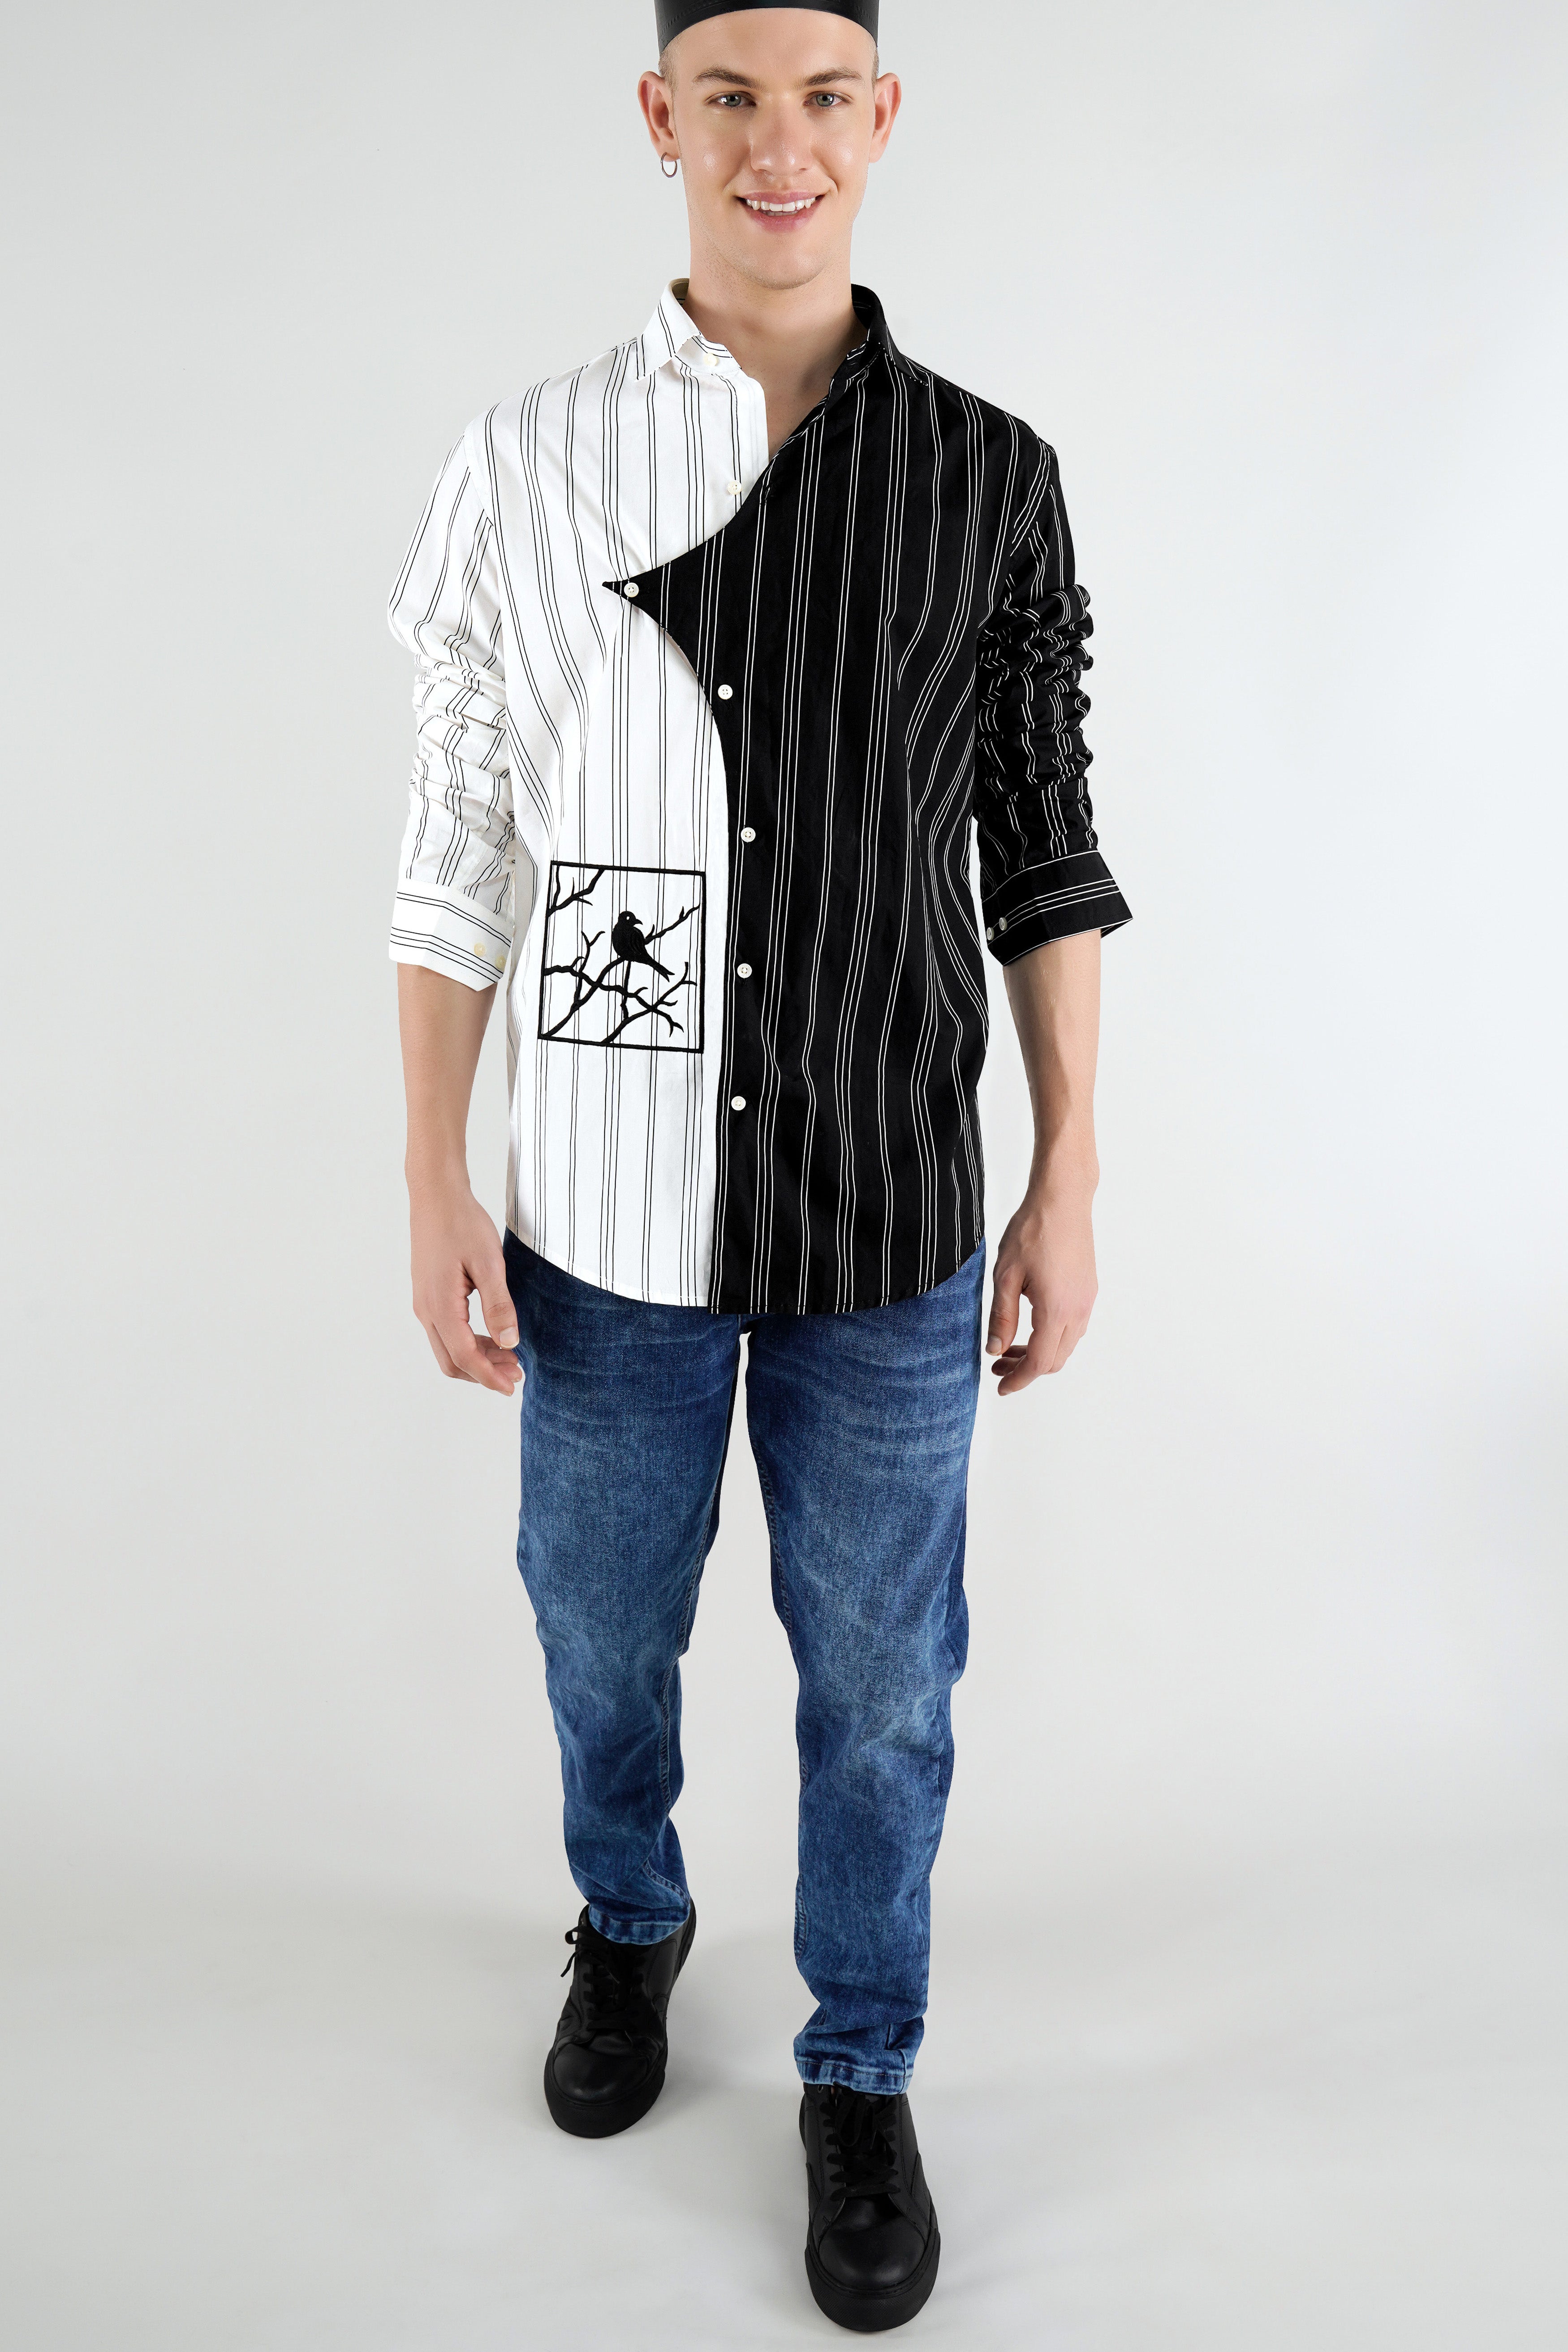 Half Withe with Half Black Pinstriped  Embellished with Embroidered Work Premium Cotton Designer Shirt